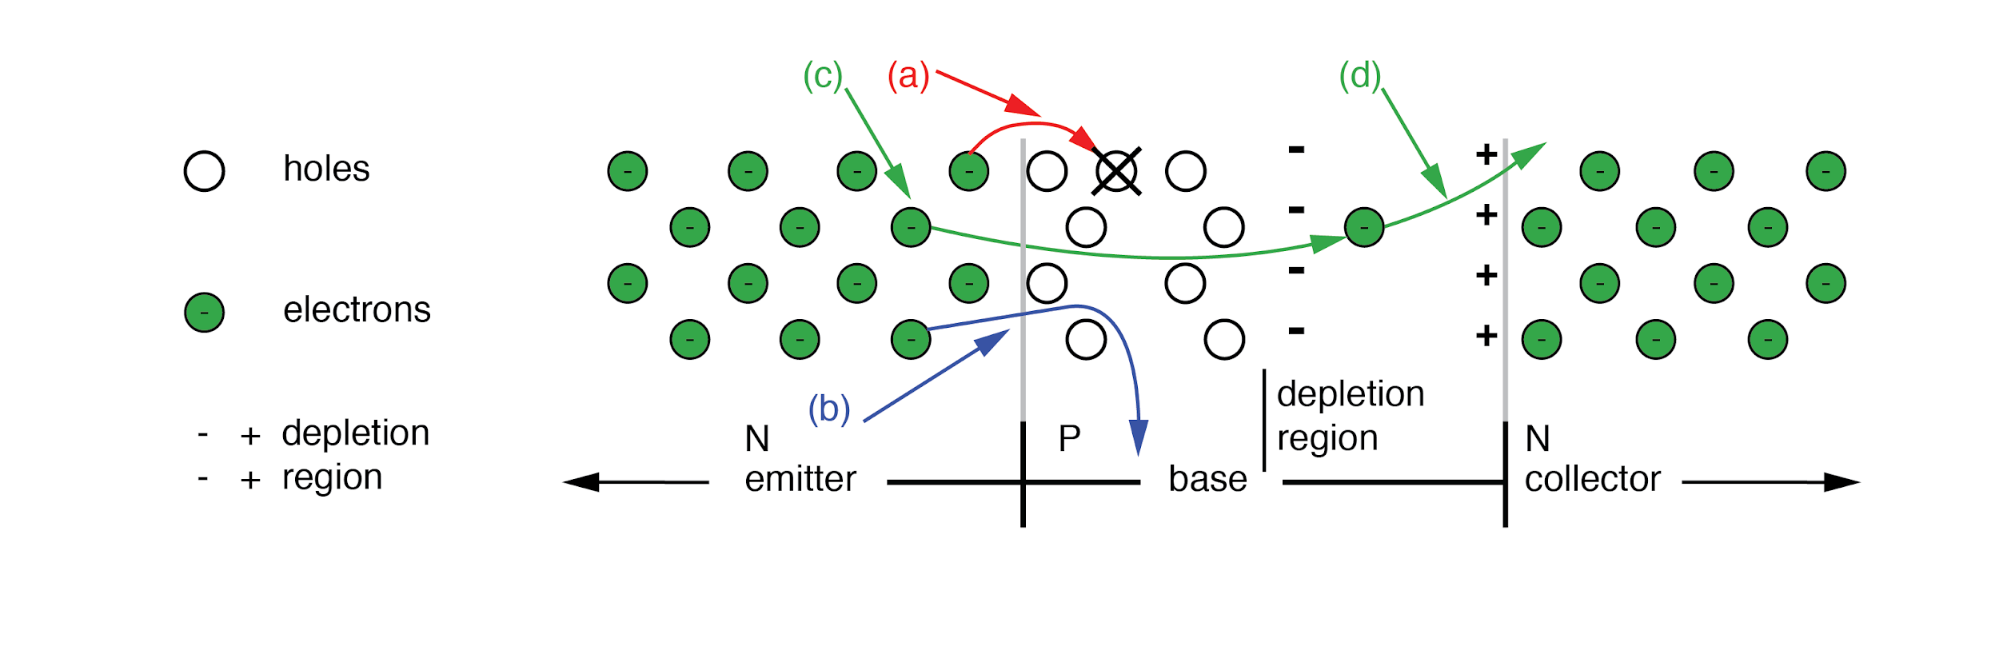 Disposition of electrons entering base: (a) Lost due to recombination with base holes. (b) Flows out base lead. (c) Most diffuse from emitter through thin base into base-collector depletion region, and (d) are rapidly swept by the strong depletion region electric field into the collector.